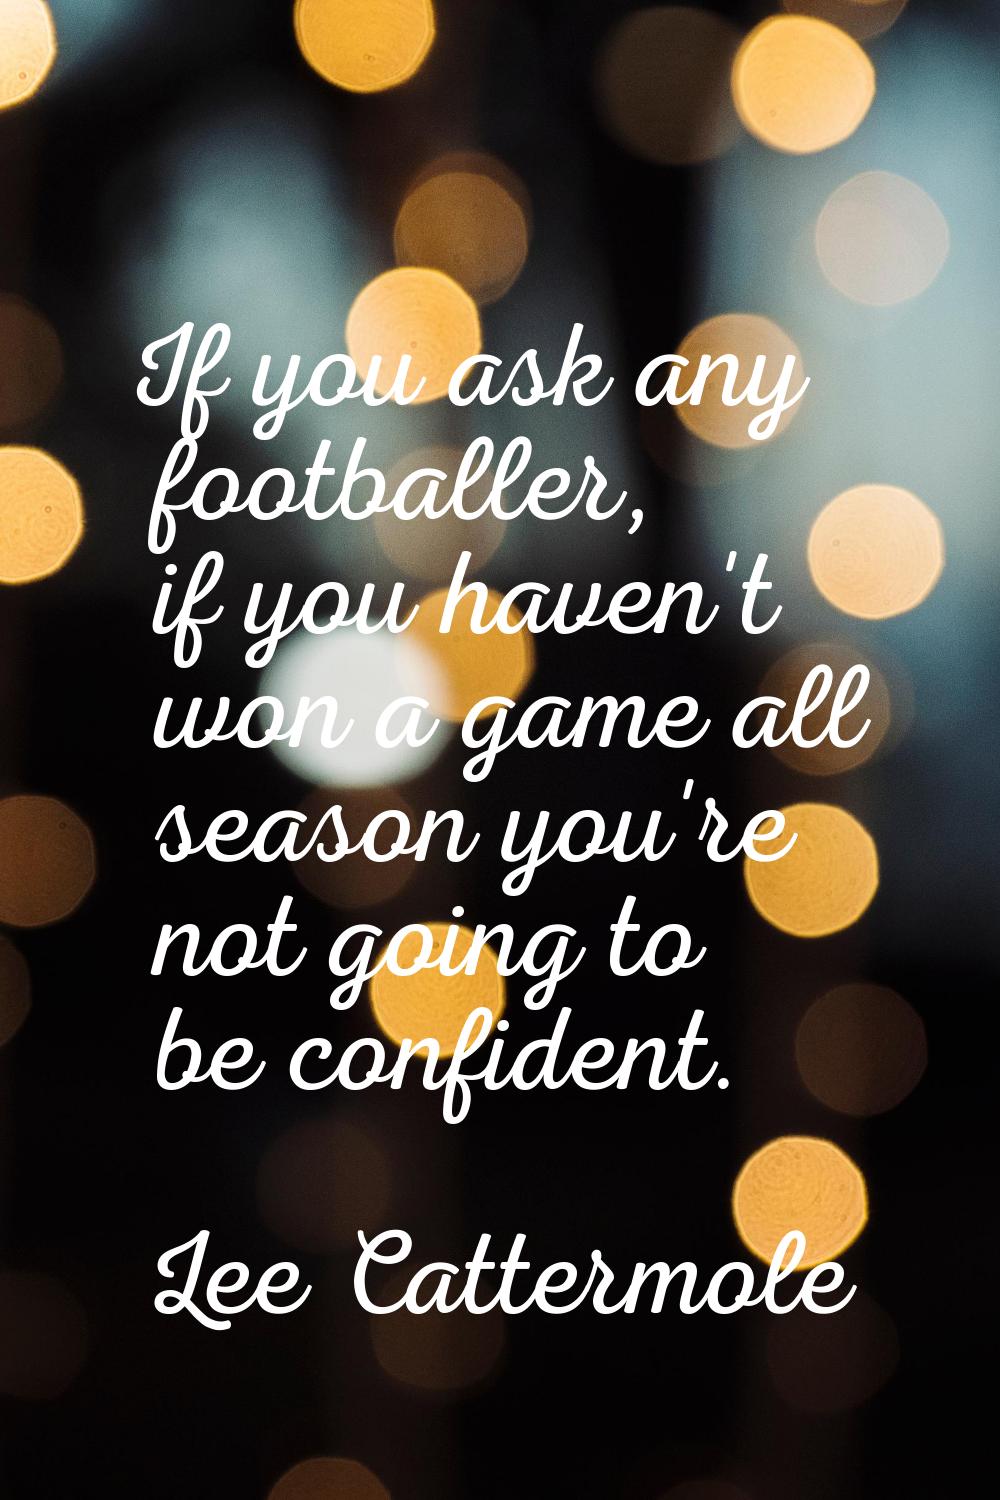 If you ask any footballer, if you haven't won a game all season you're not going to be confident.